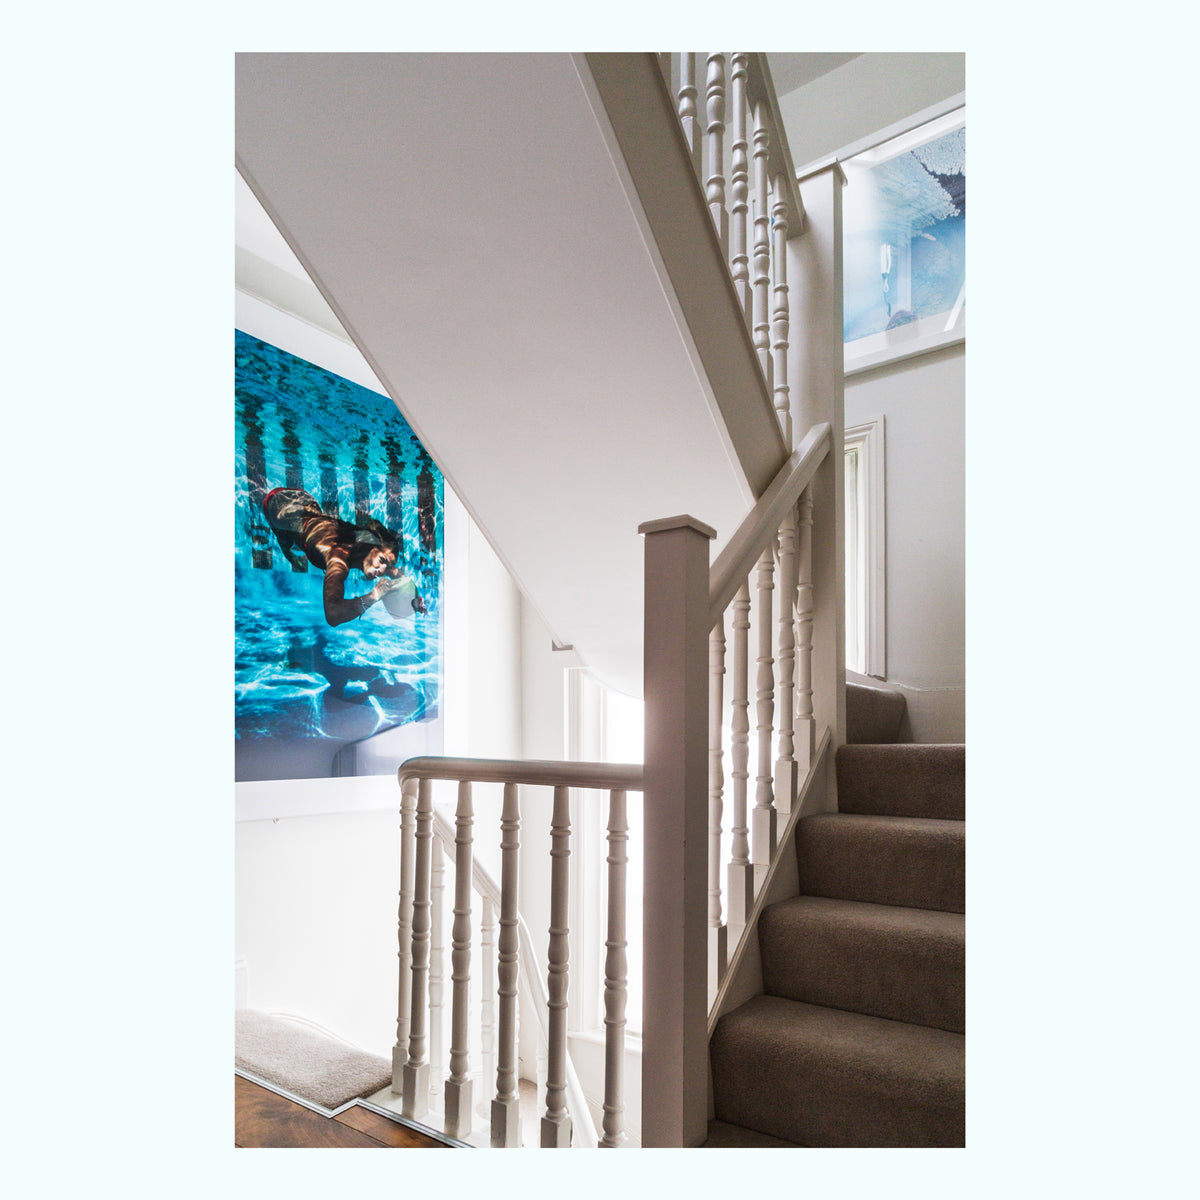 Art Consultancy, London Private Residence